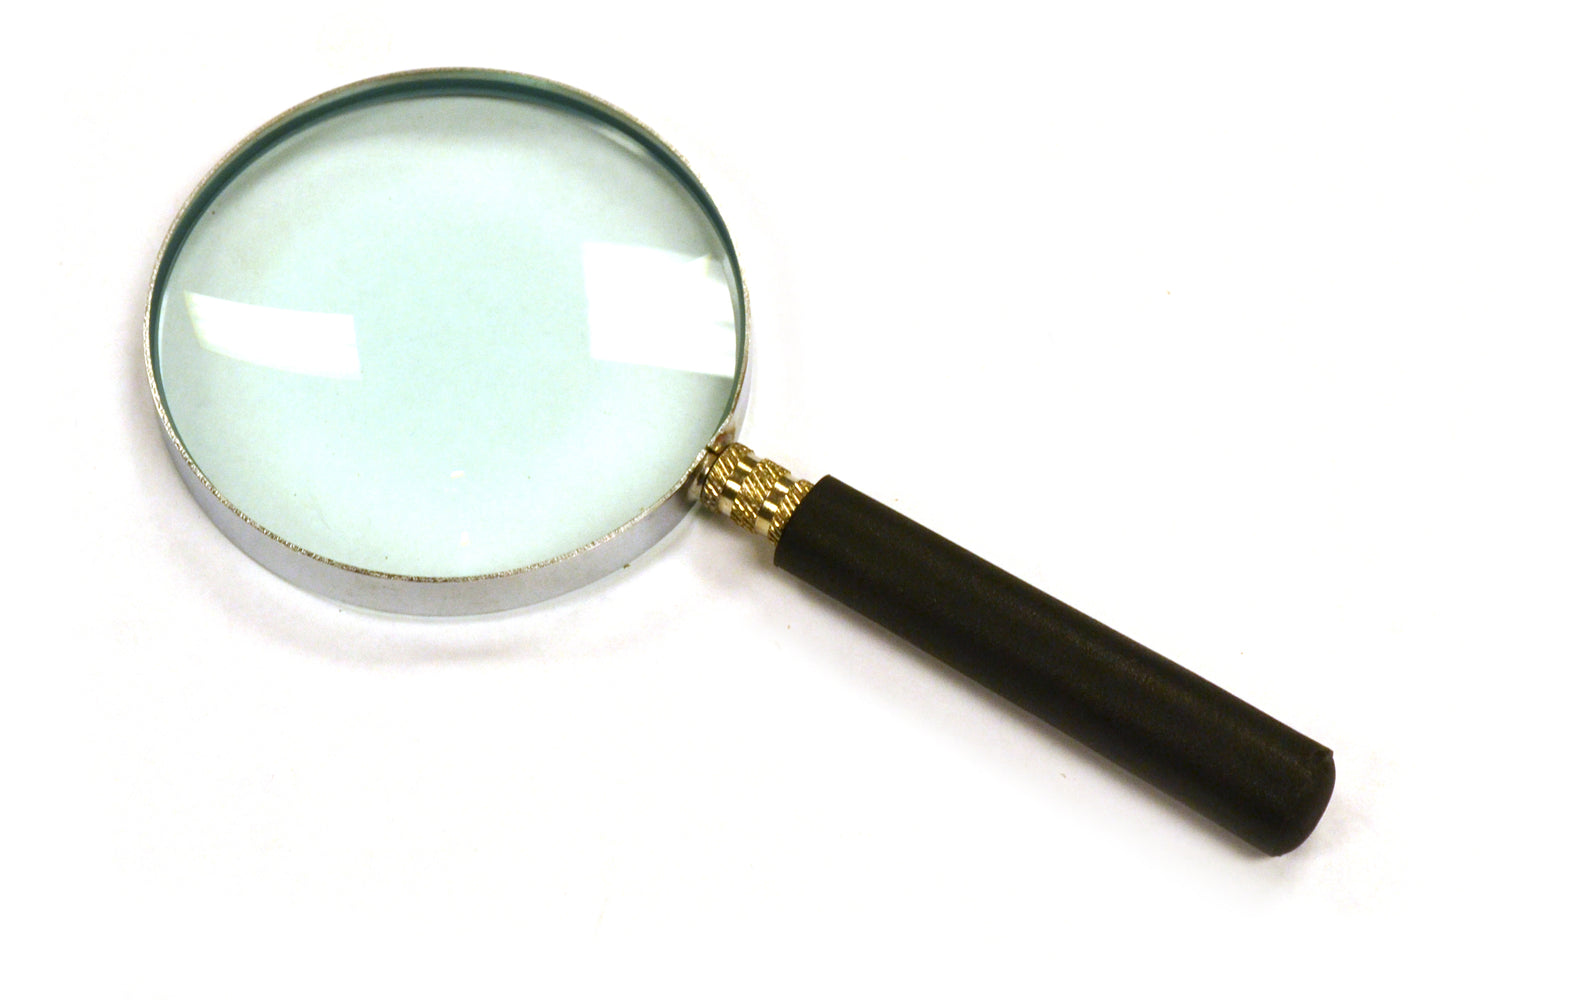 Magnifying Glass, 2.5x Magnification - Lab Quality, 3" diameter, 6" Focal Length - Eisco Labs